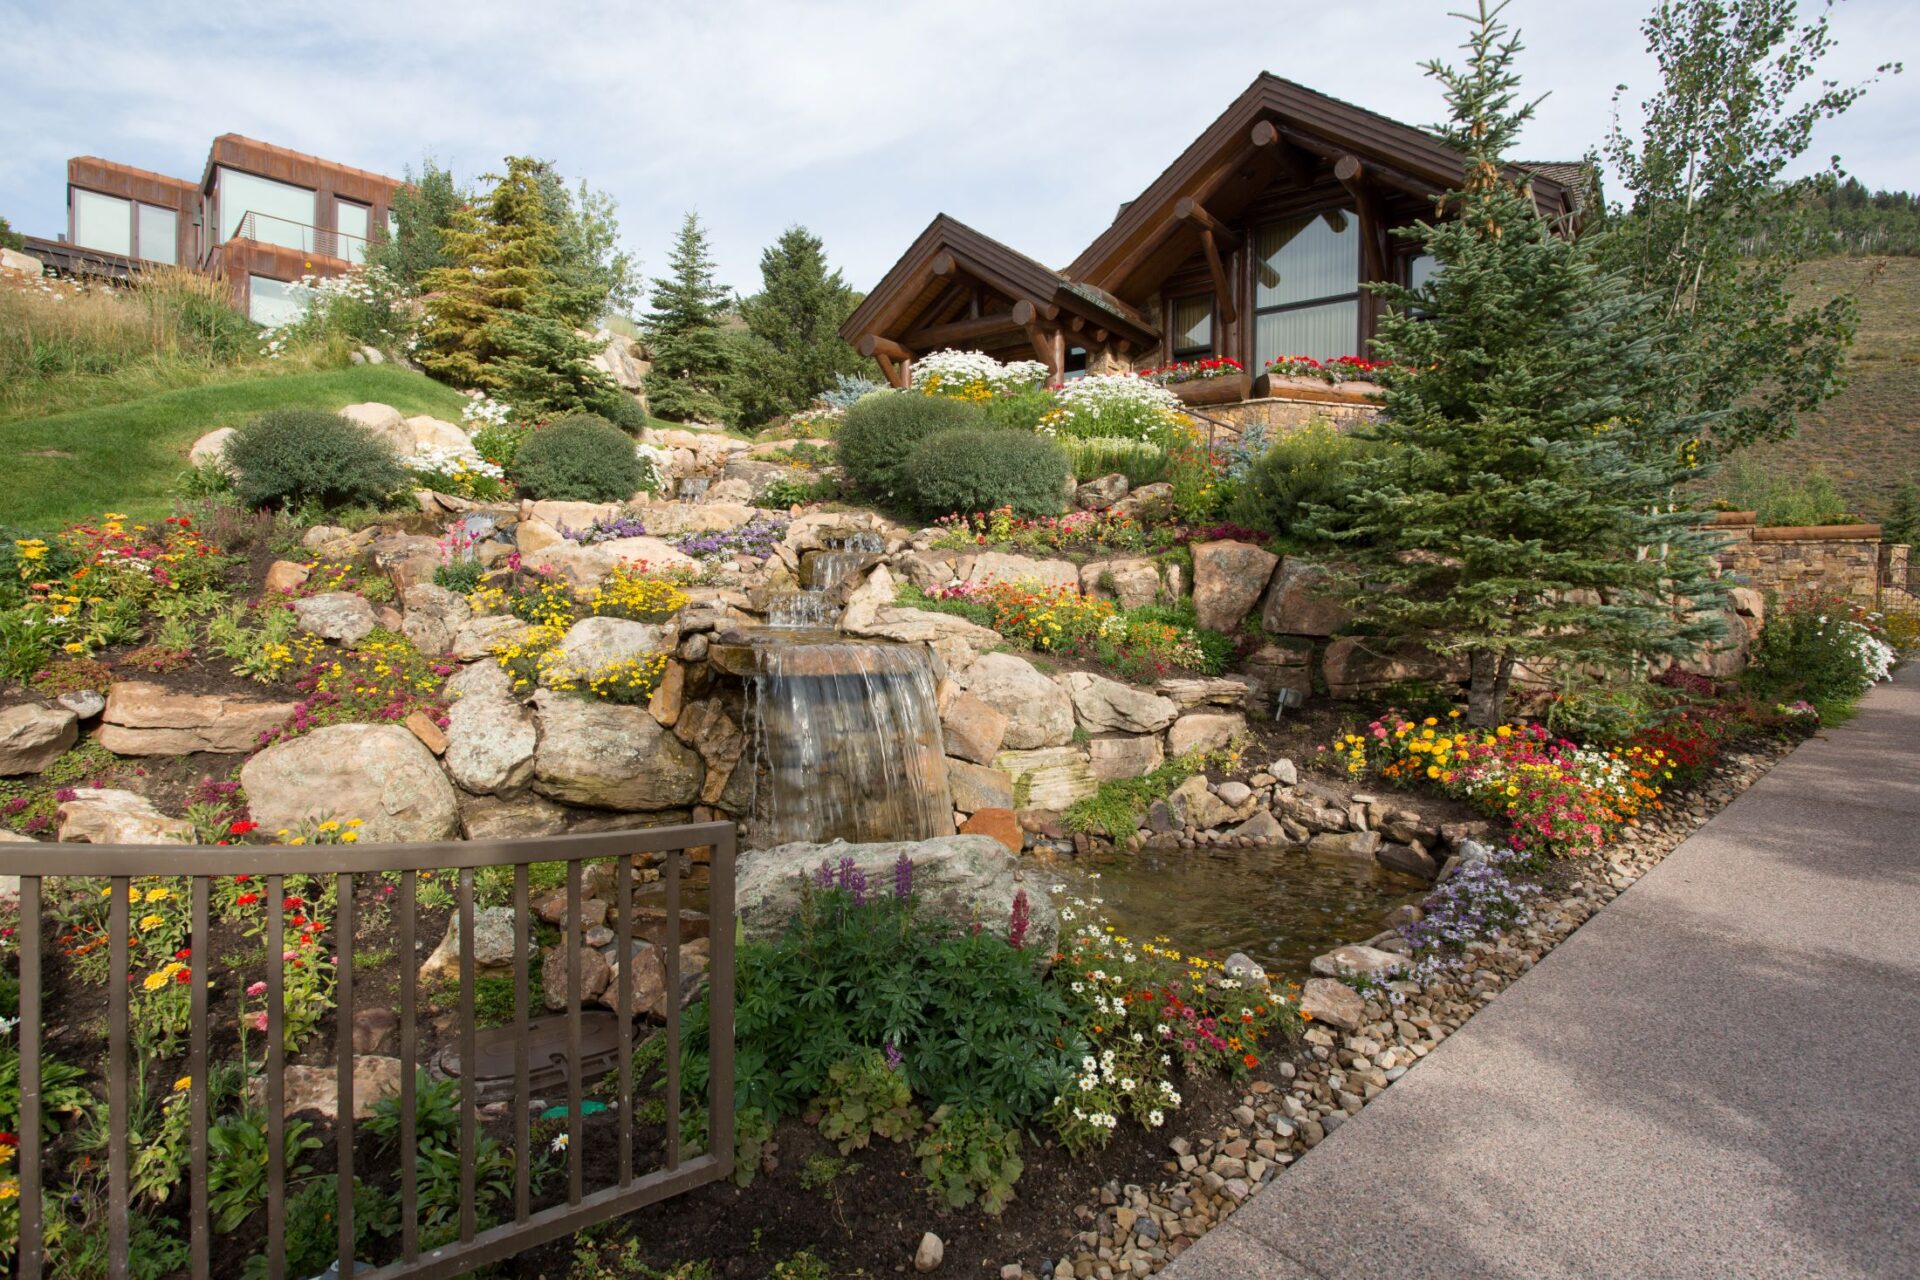 A beautifully landscaped garden with colorful flowers, a rock waterfall, and a pond in front of a house with large windows and a wooden facade.